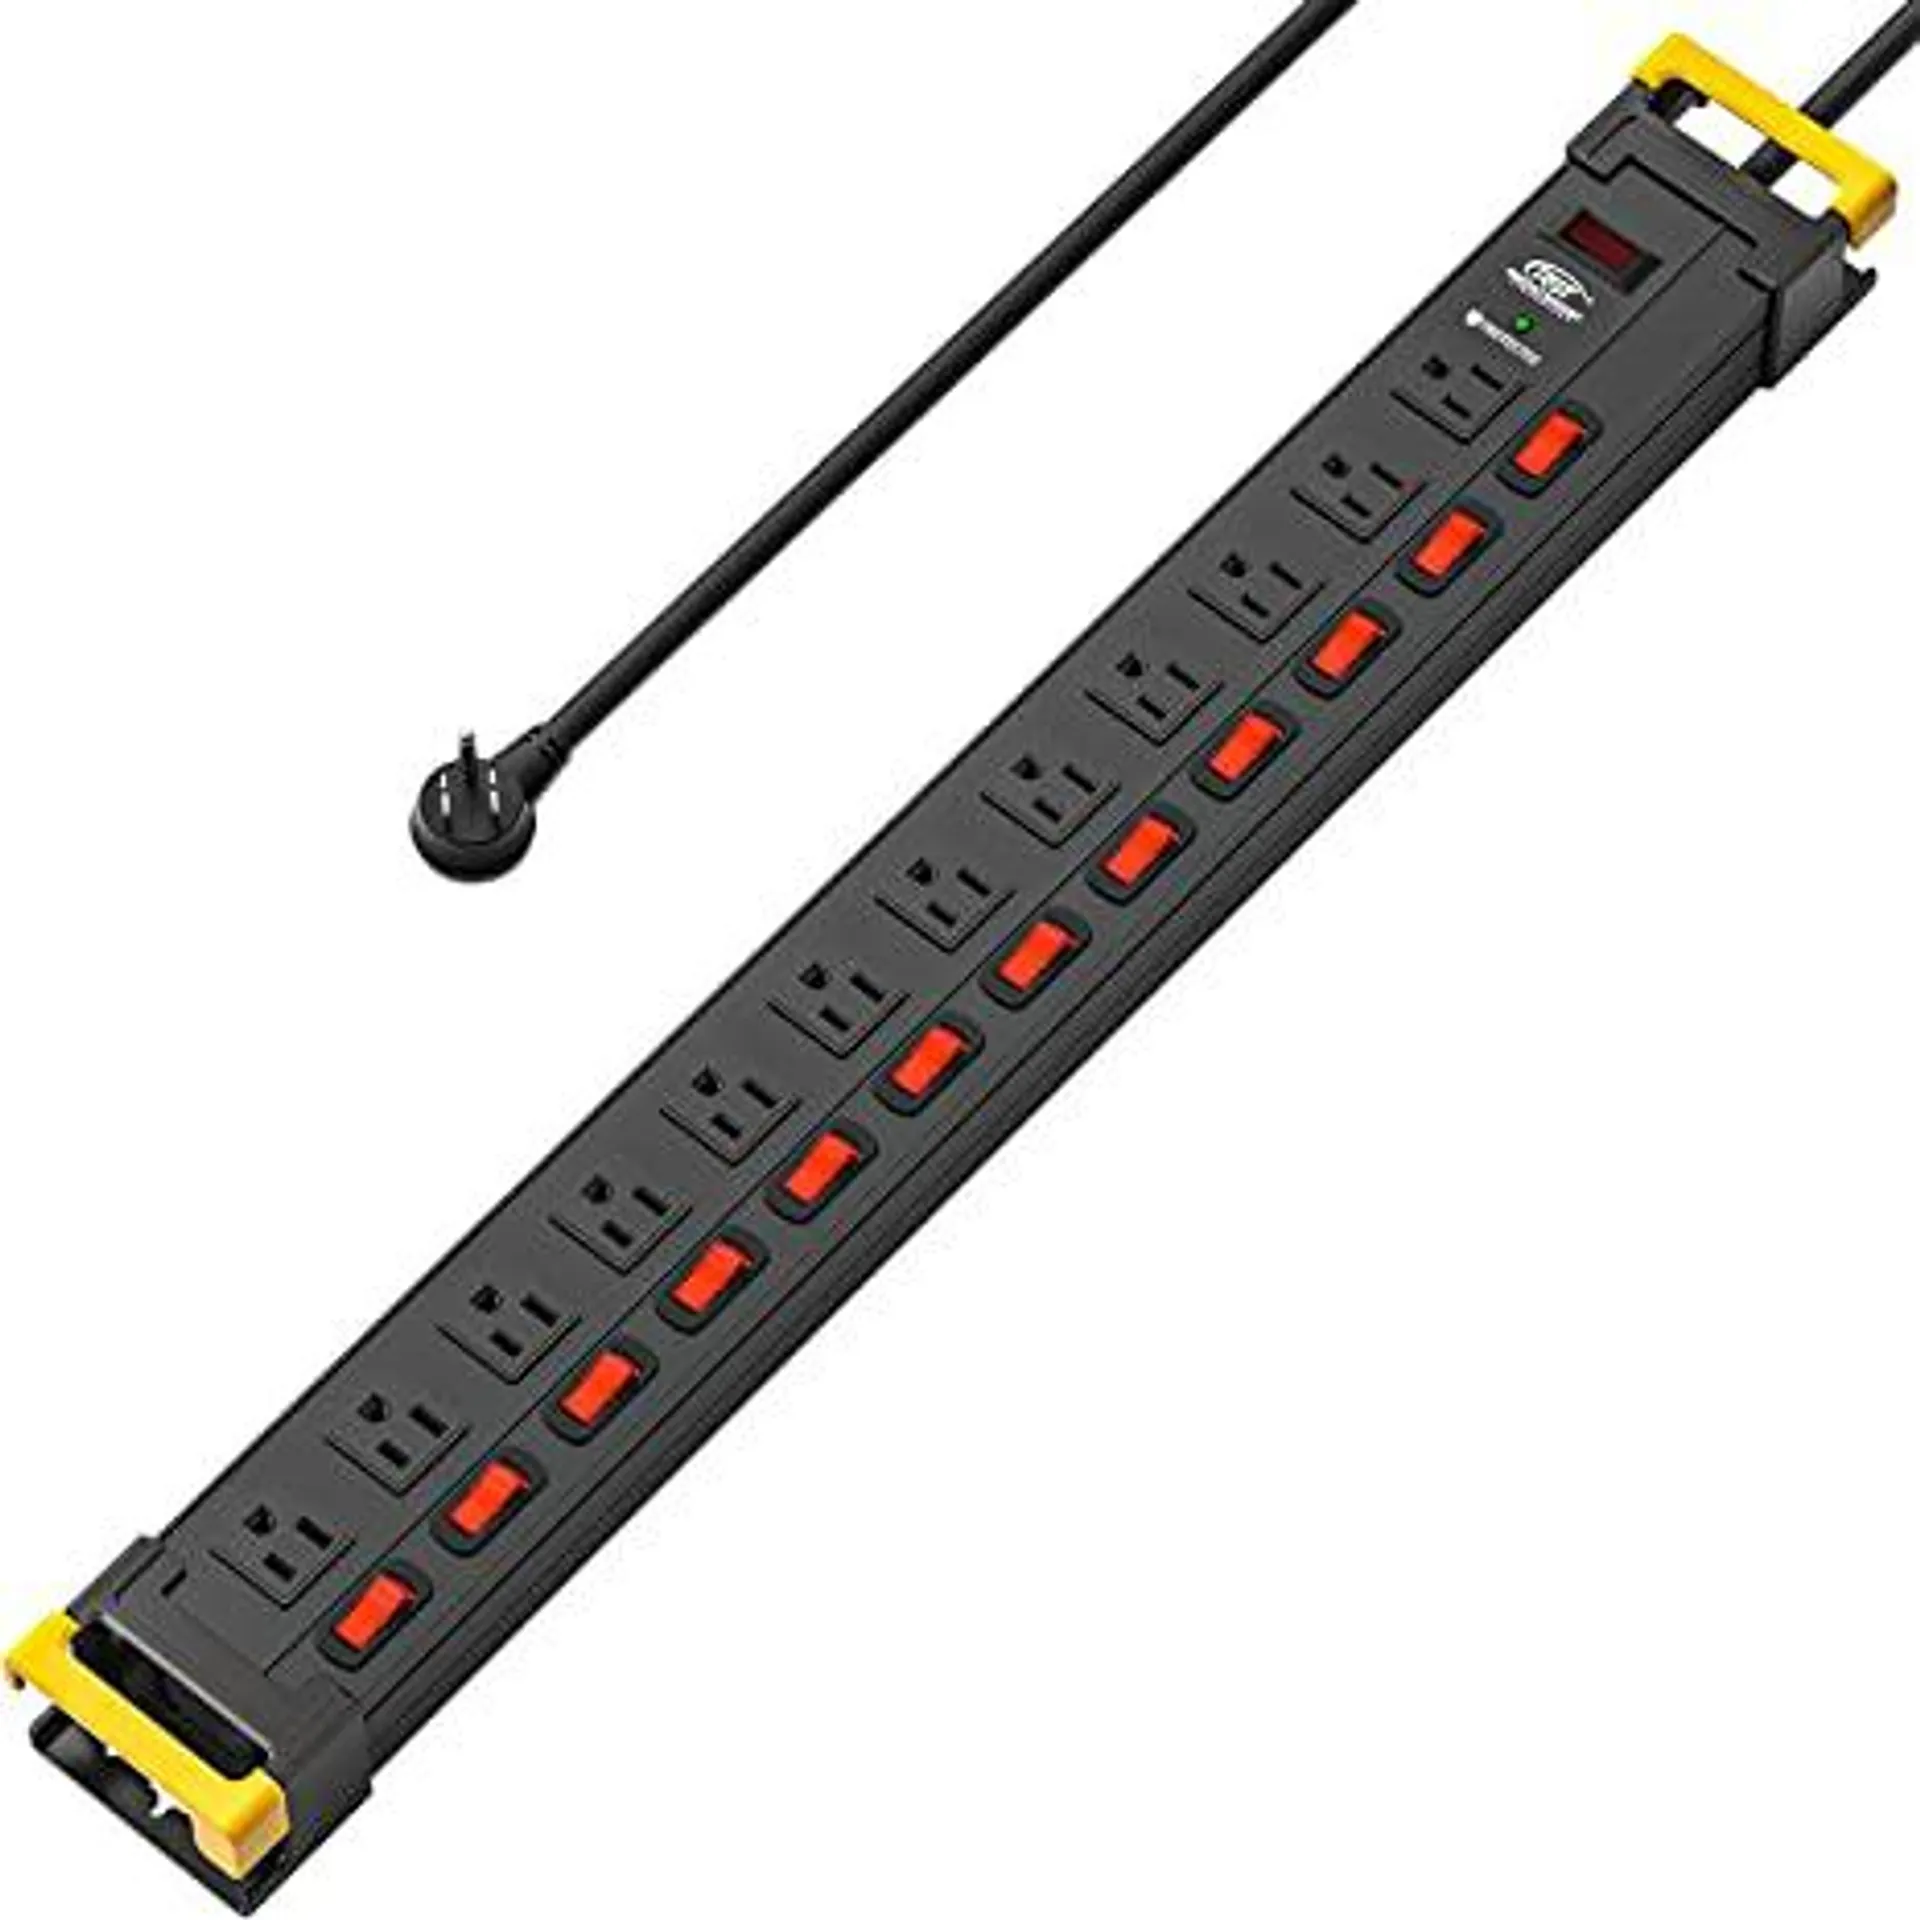 CRST Heavy Duty Power Strip Surge Protector with Individual Switches,12 Outlets Long Power Strips with Cord Manager, 9FT, 1020J, 15AMP/1875W (Black)